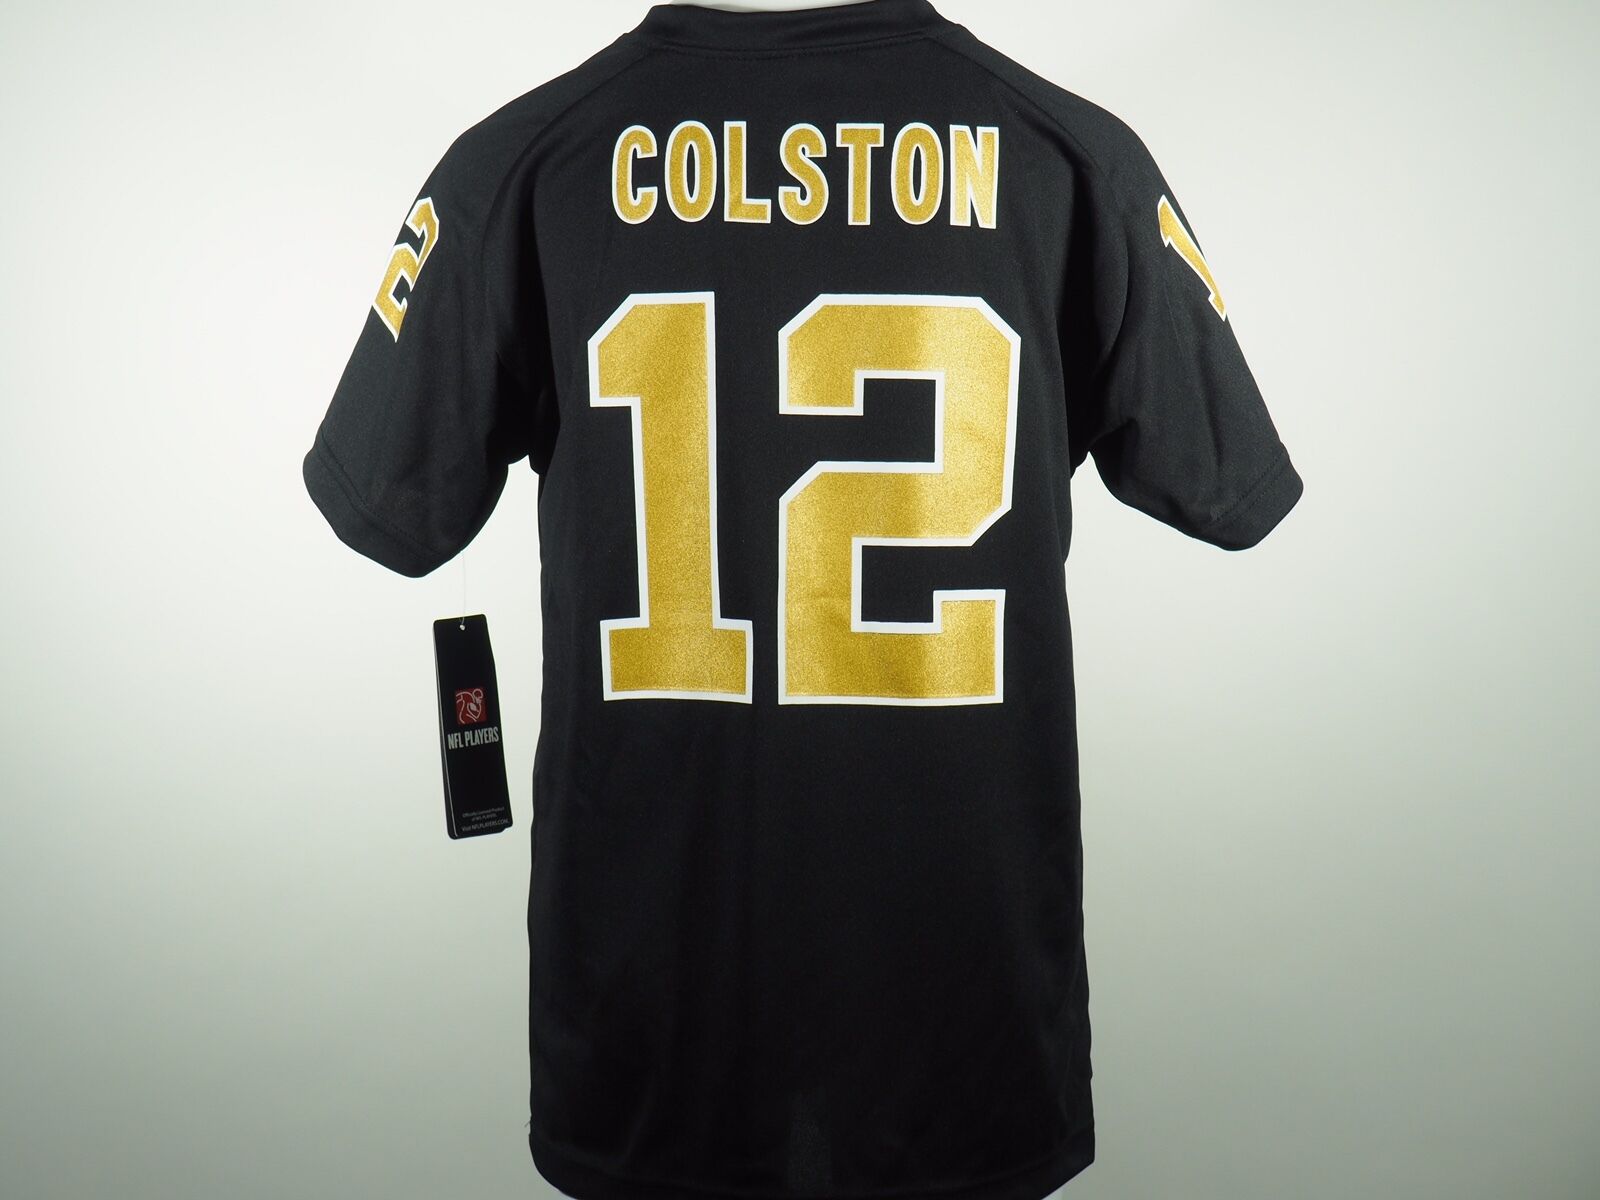 New Orleans Saints 12 Marques Colston NFL Youth Jersey Style Athletic Shirt